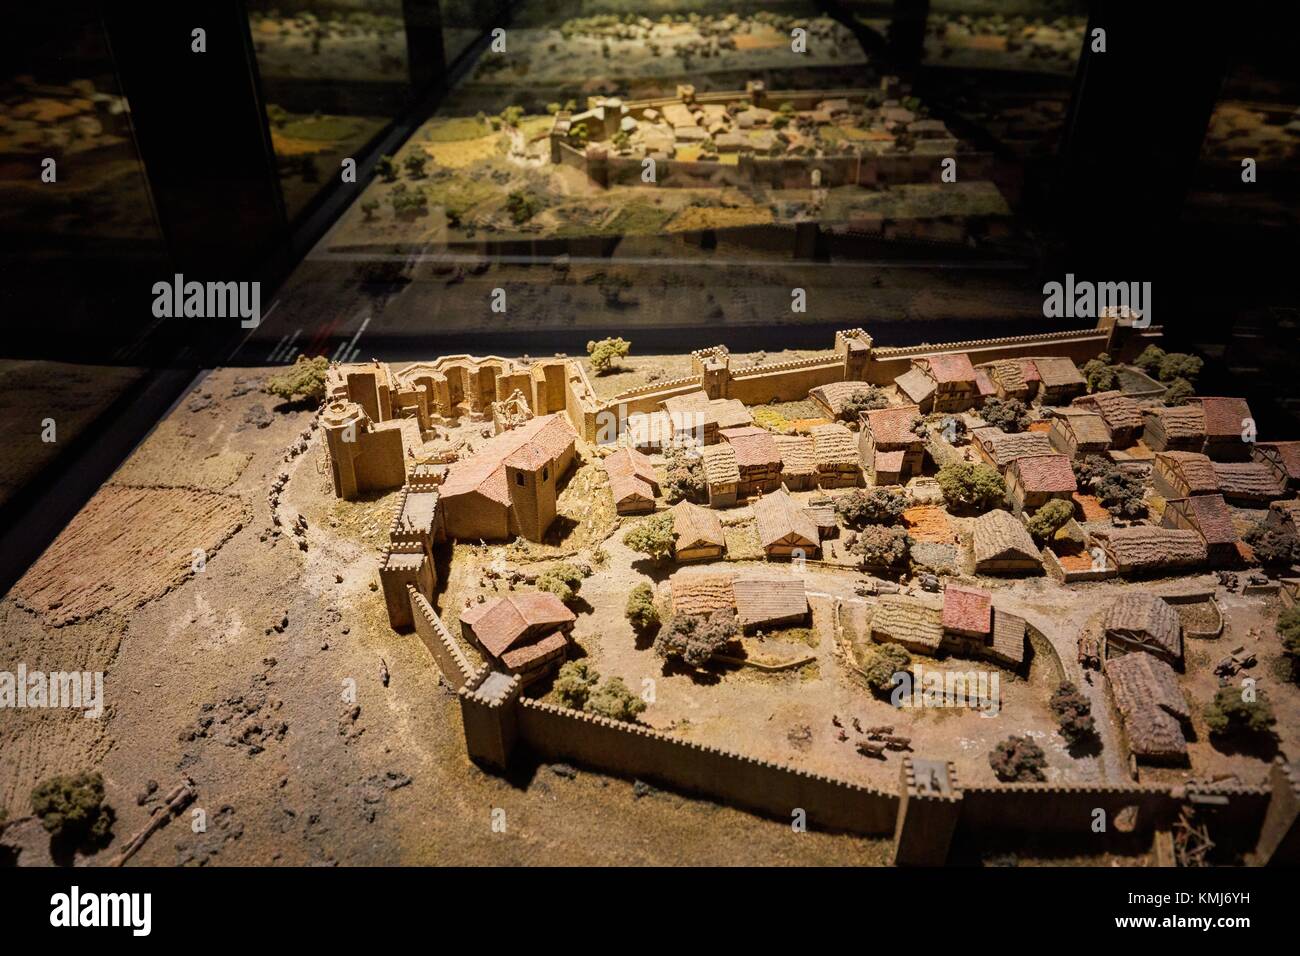 Model of the city of Vitoria in the Middle Ages, Foundations of the cathedral, Cathedral of Santa Maria, Vitoria-Gasteiz, Araba, Basque Country, Stock Photo